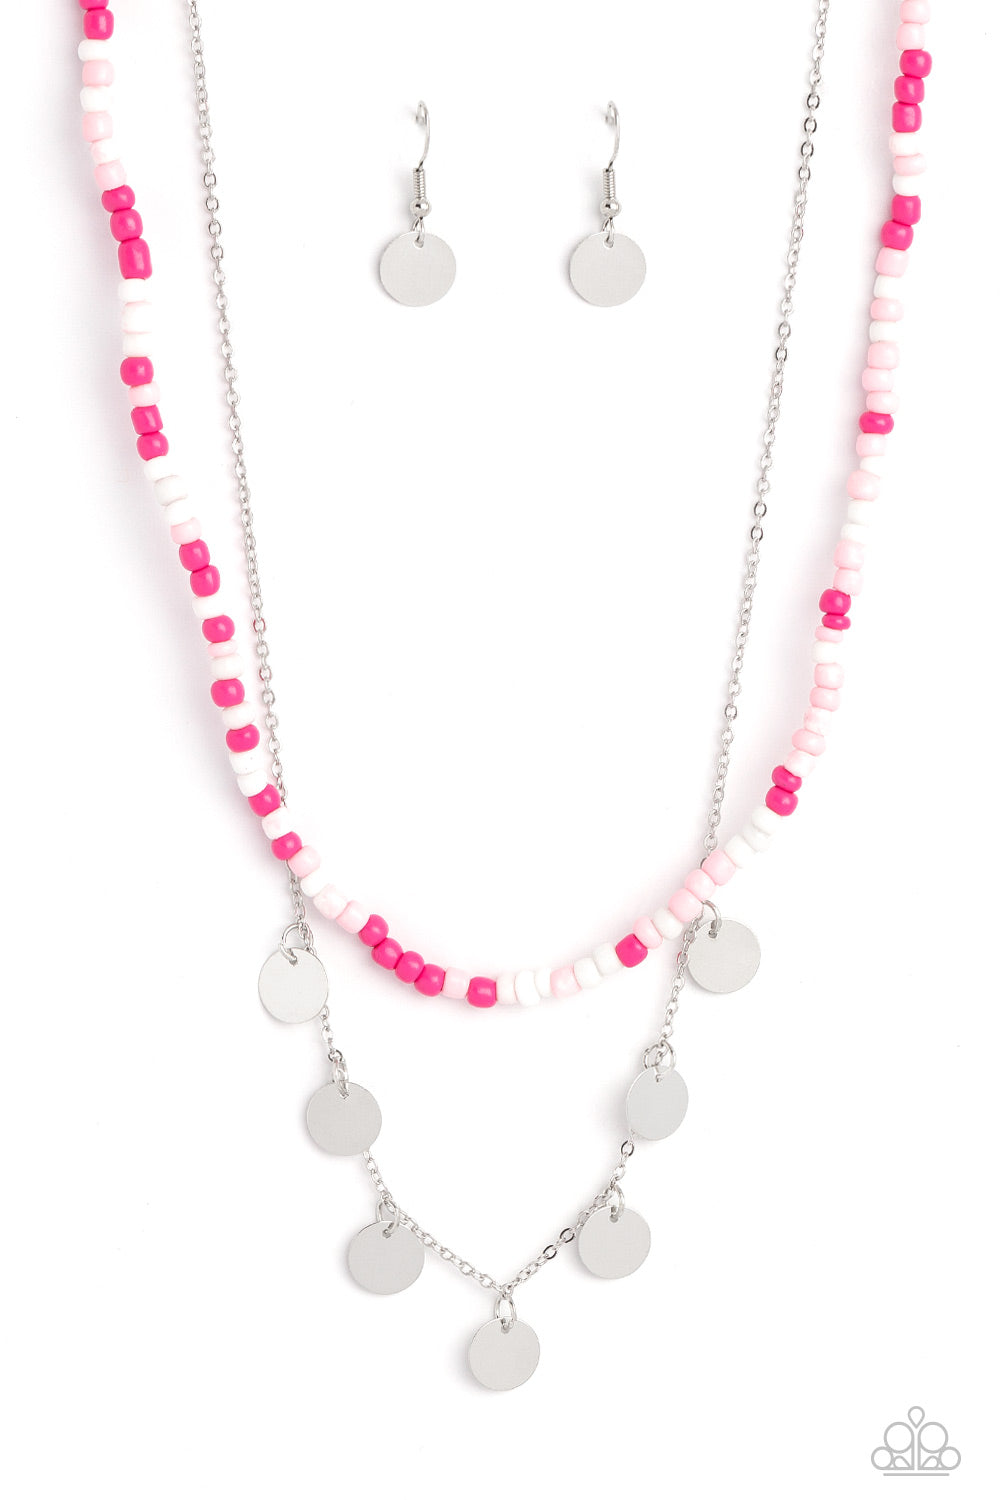 Comet Candy Necklace (Multi, Pink, Blue)